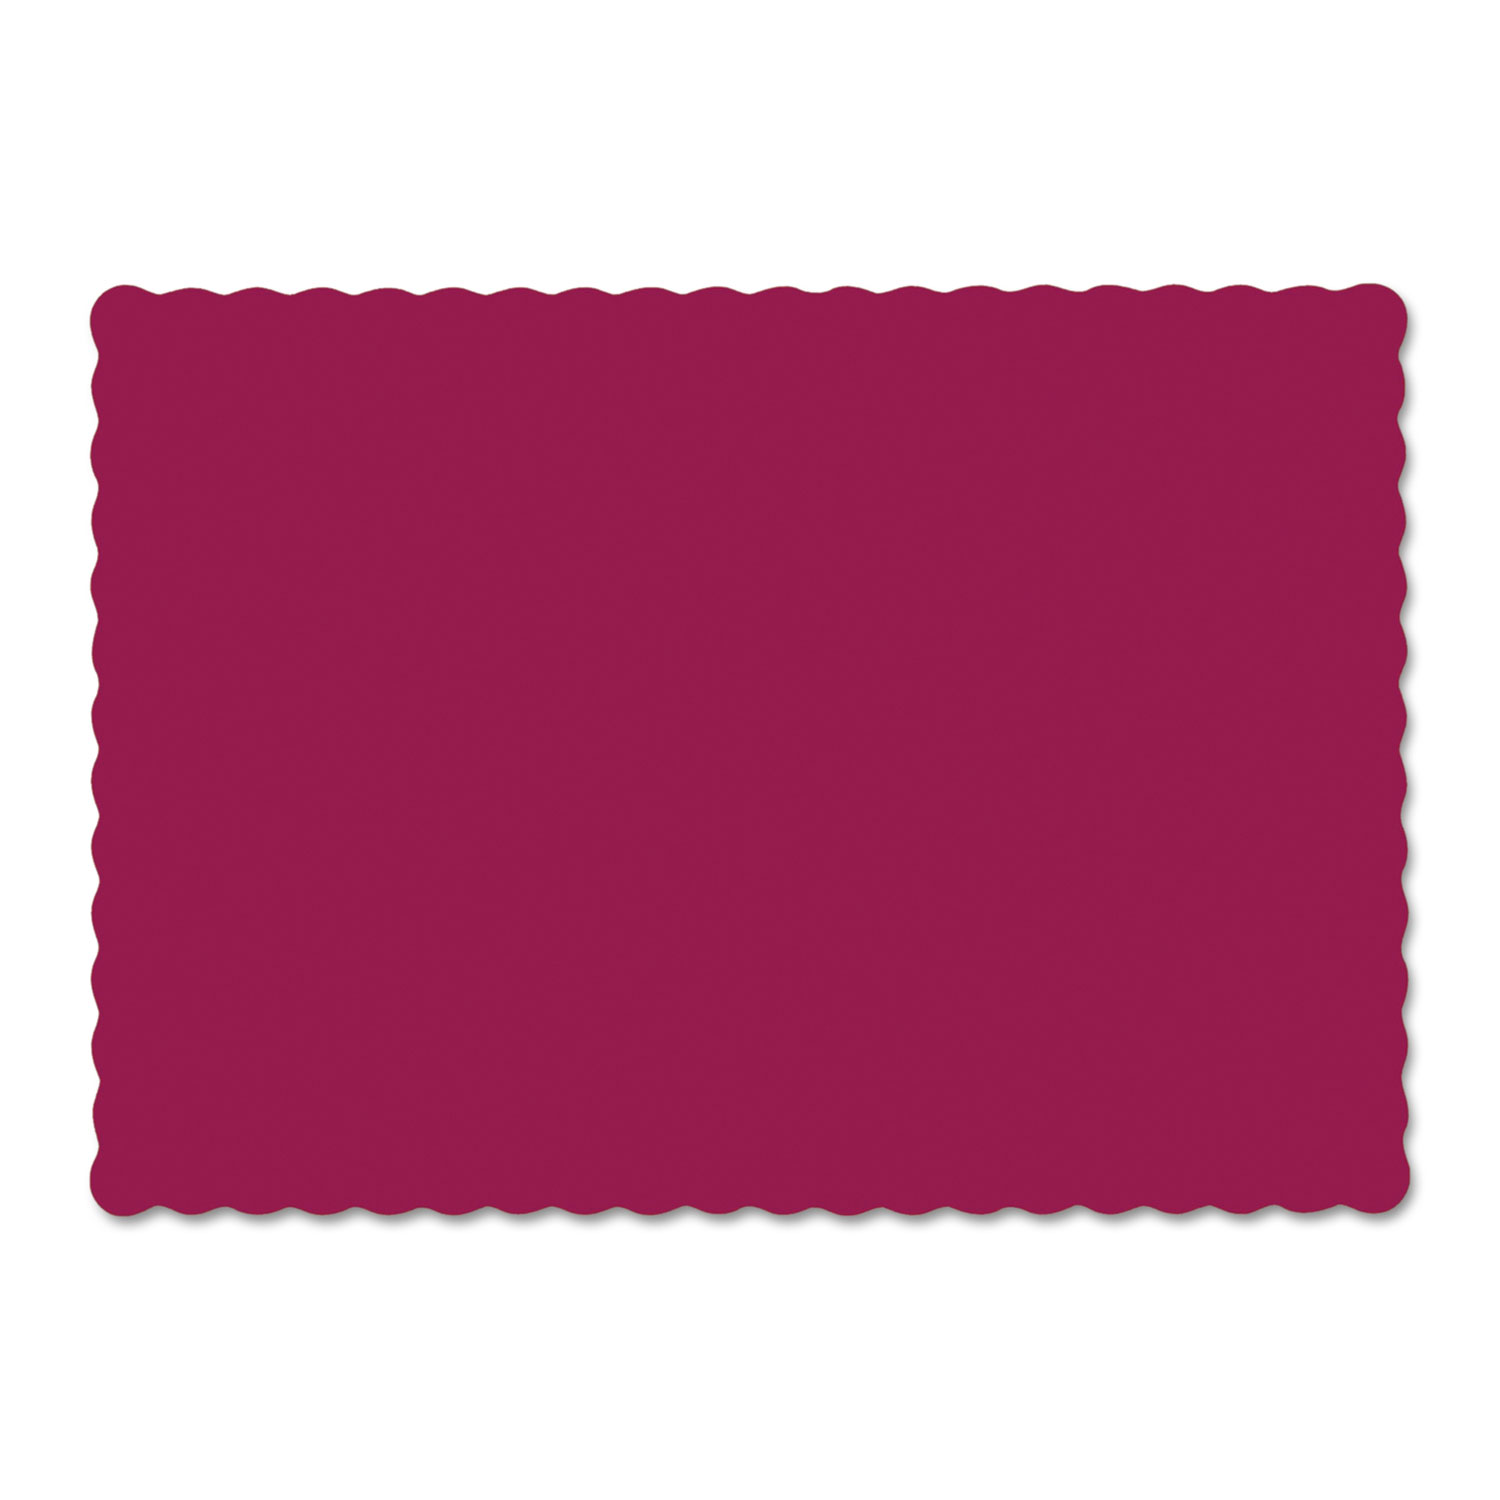  Hoffmaster 310524 Solid Color Scalloped Edge Placemats, 9.5 x 13.5, Burgundy, 1,000/Carton (HFM310524) 